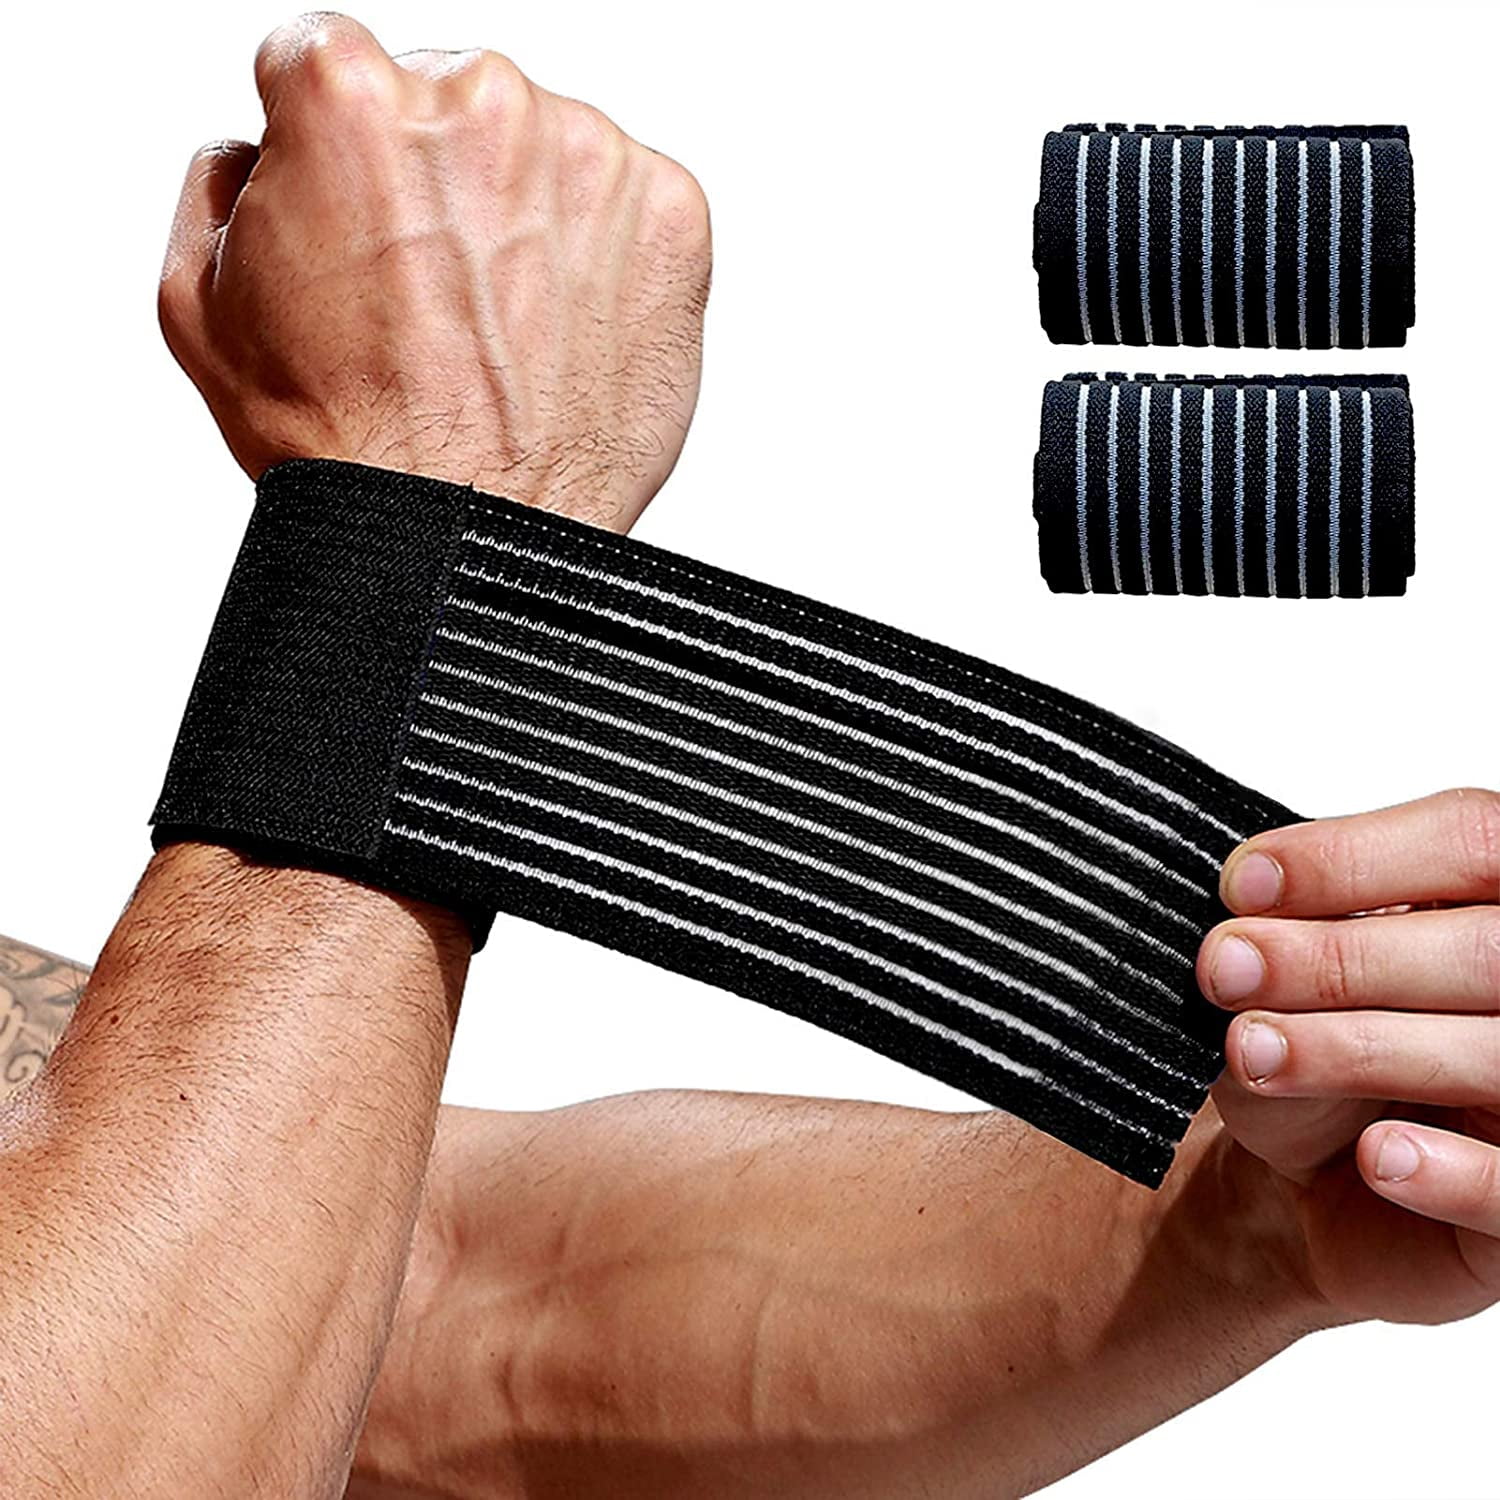 Carpal Tunnel Wrist Support Gym Brace Straps Sports Hand Wrap Bandage Breathable 